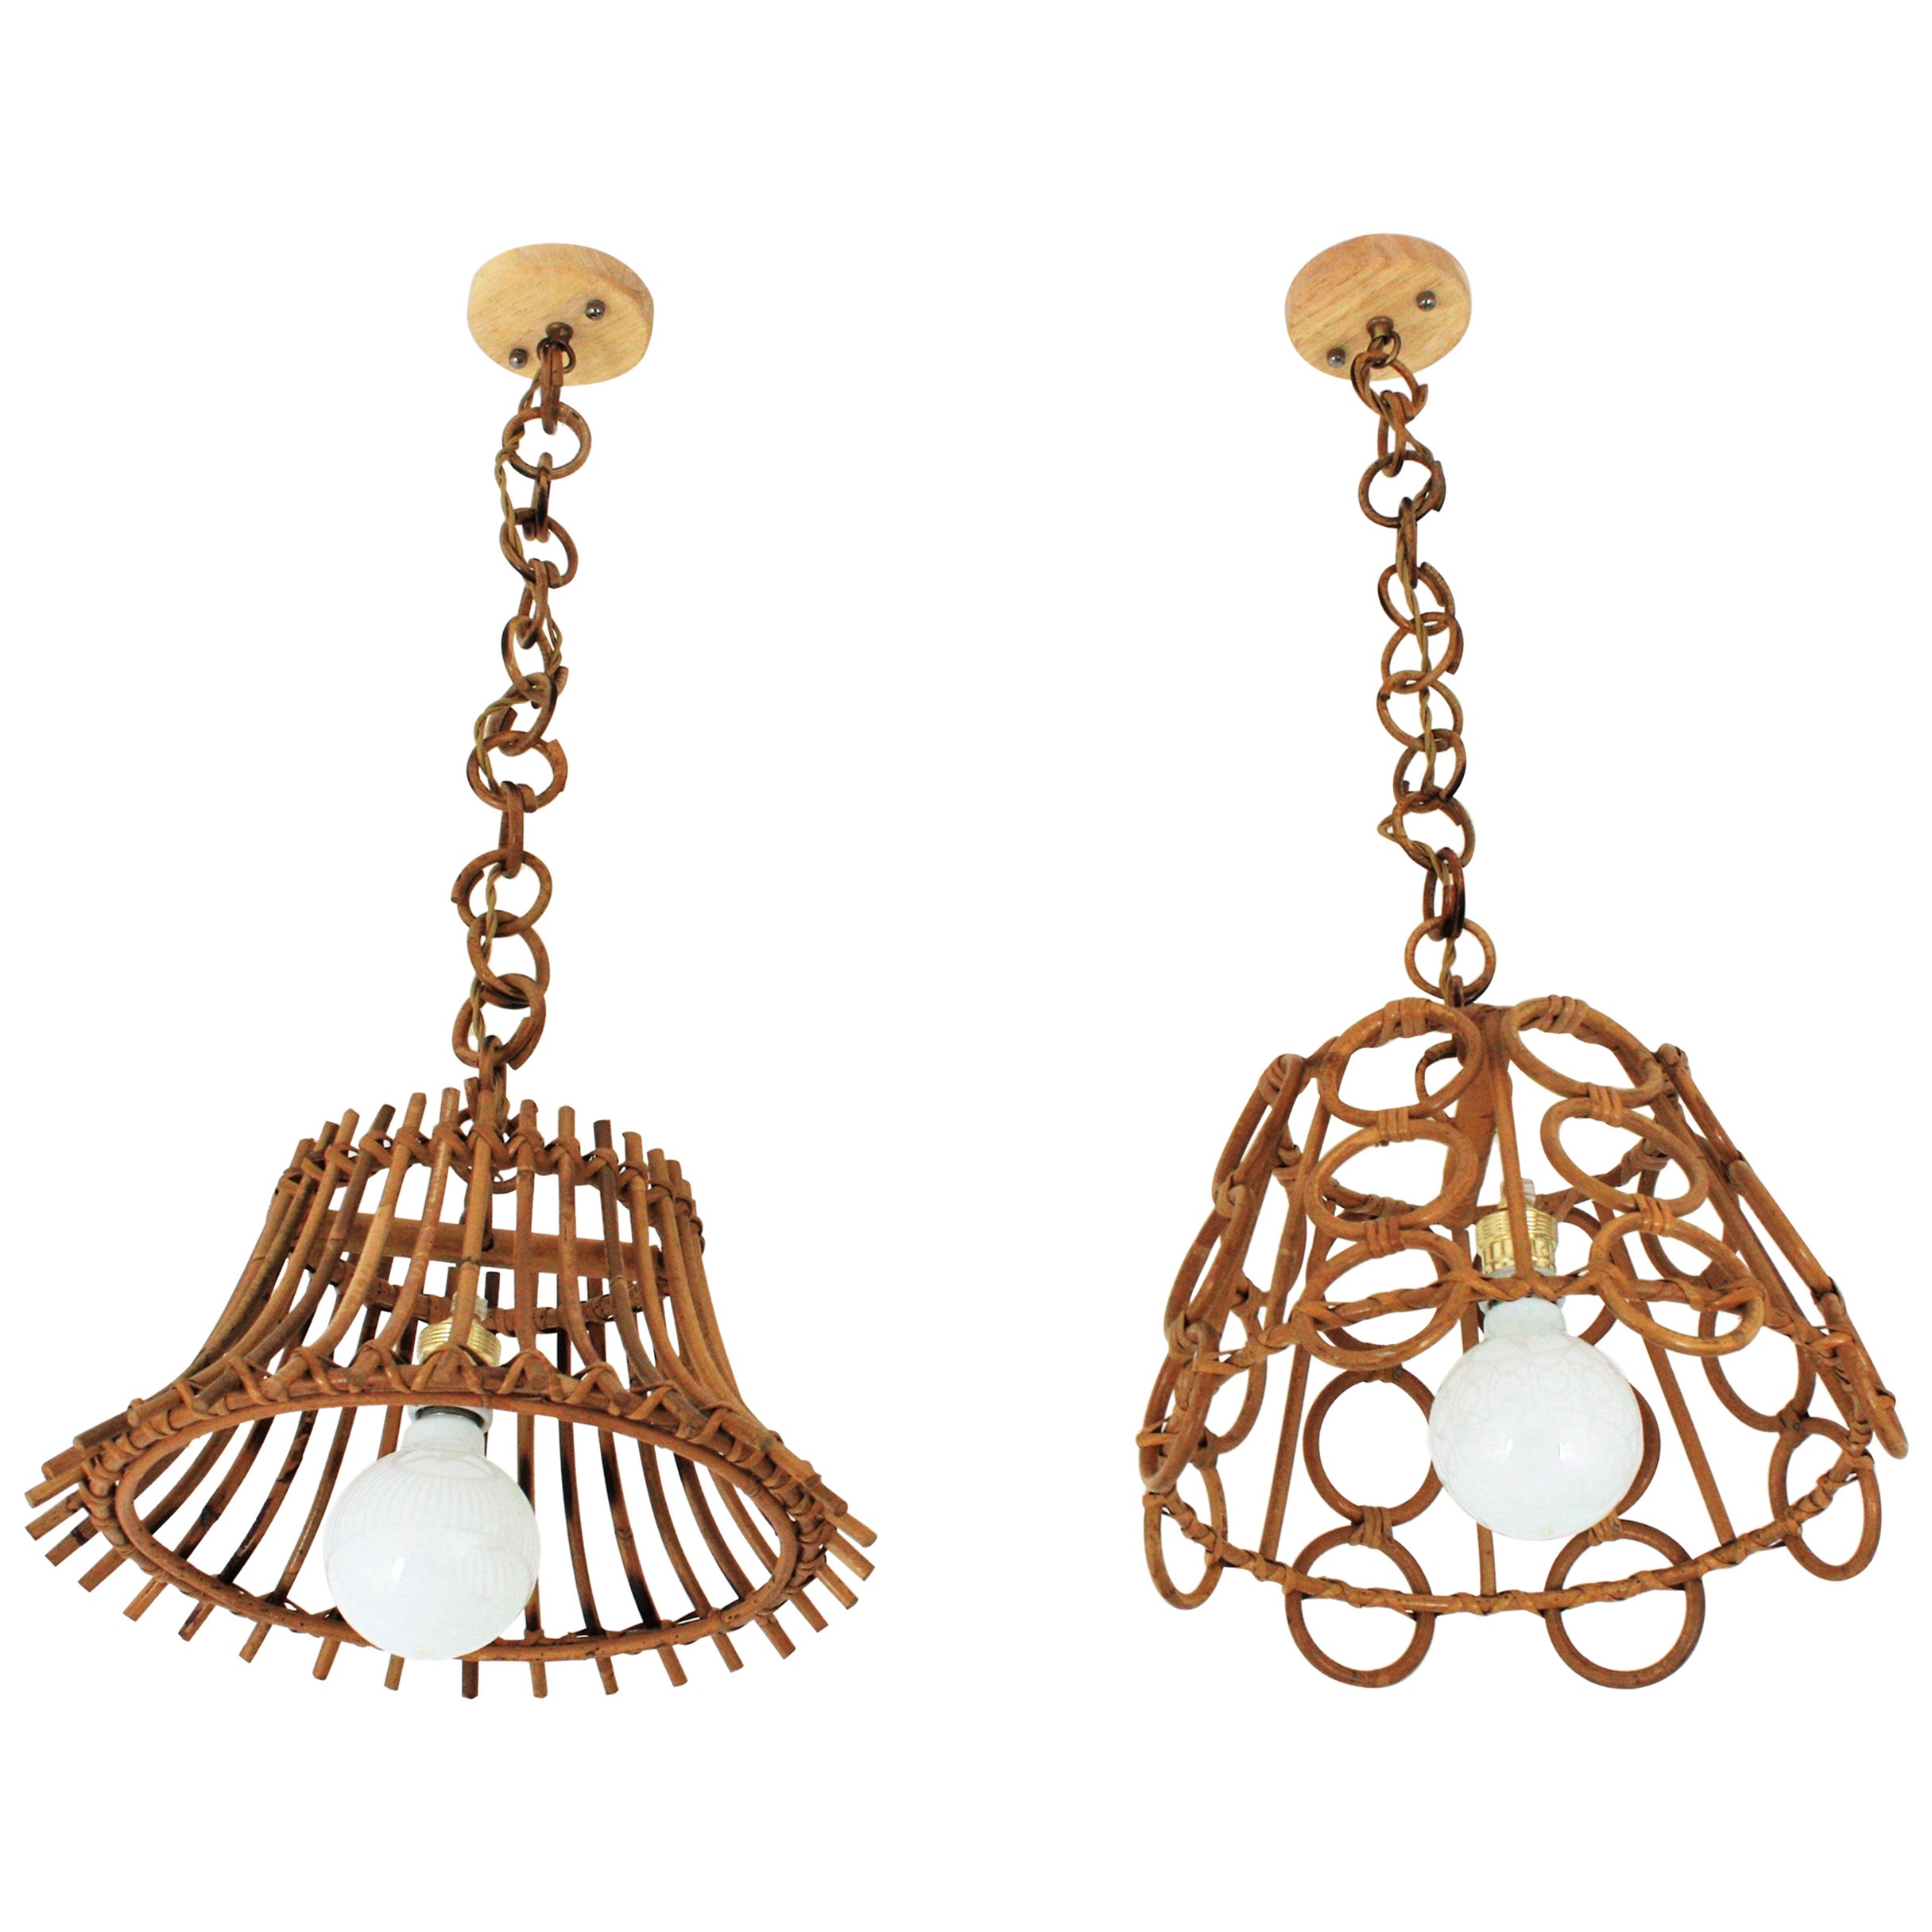 Unmatching Pair of Rattan Bamboo Pendants / Hanging Lights For Sale